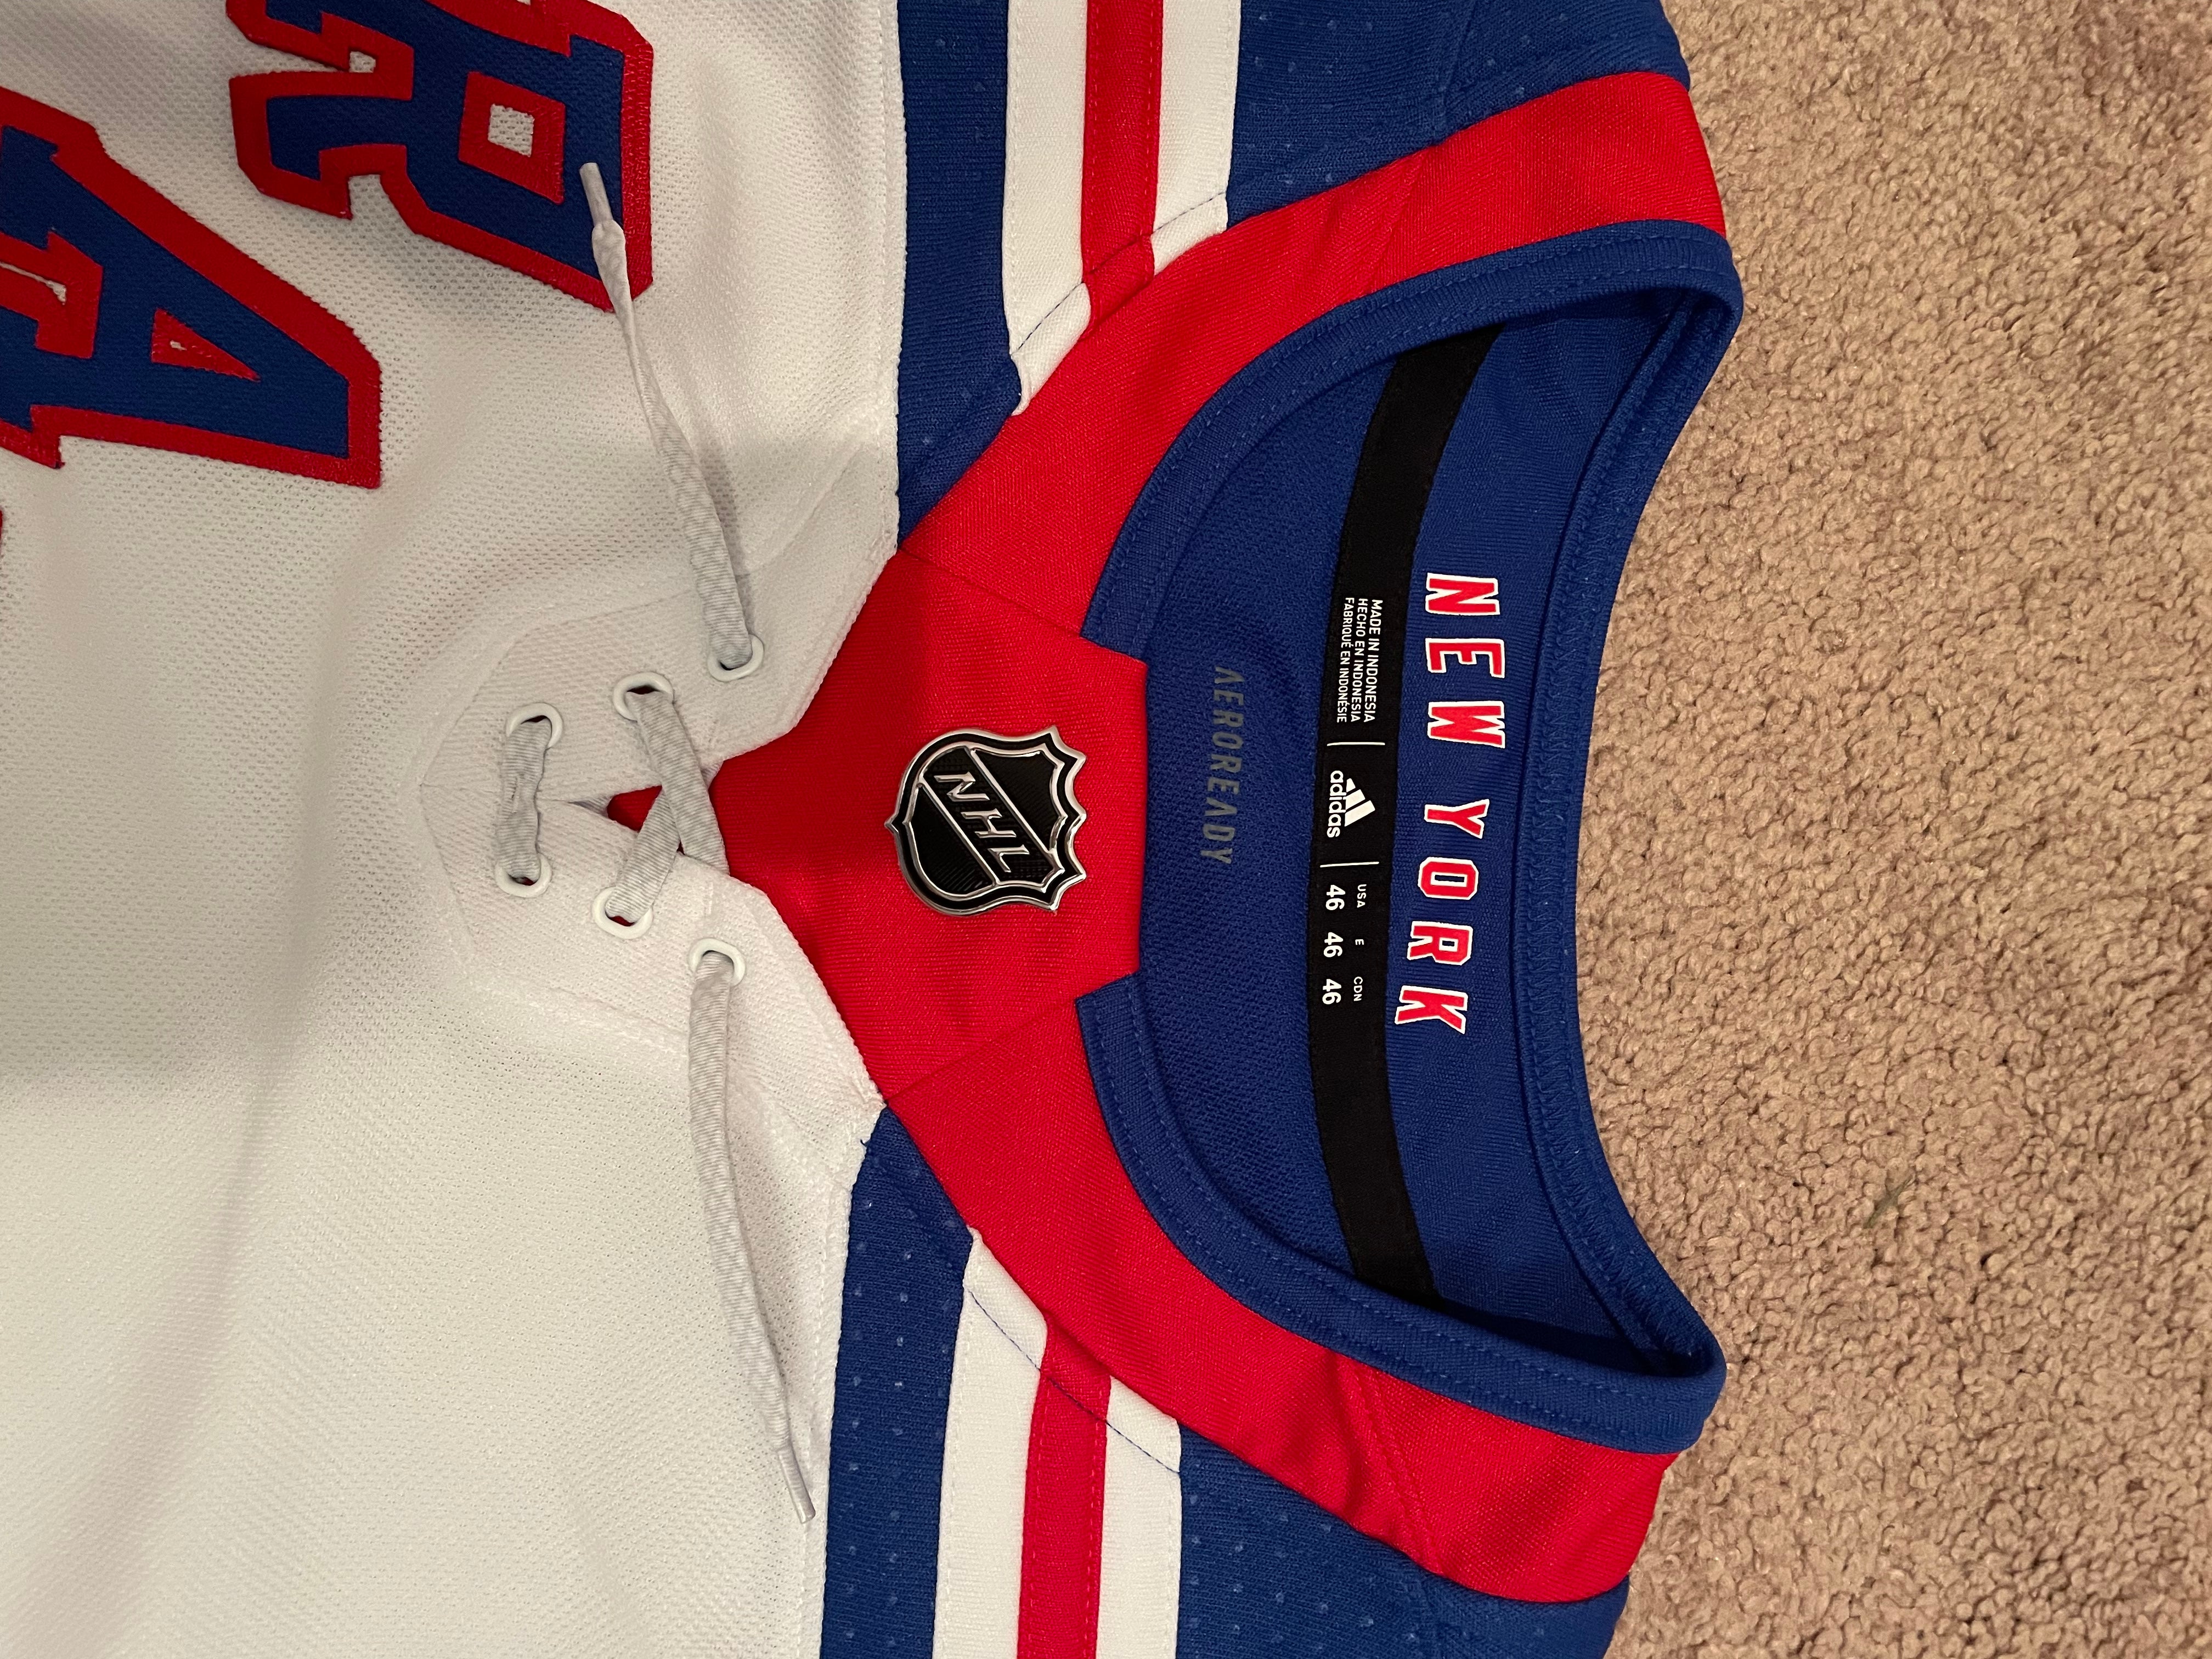 Adidas New York Rangers Authentic NHL Jersey - Away - Adult